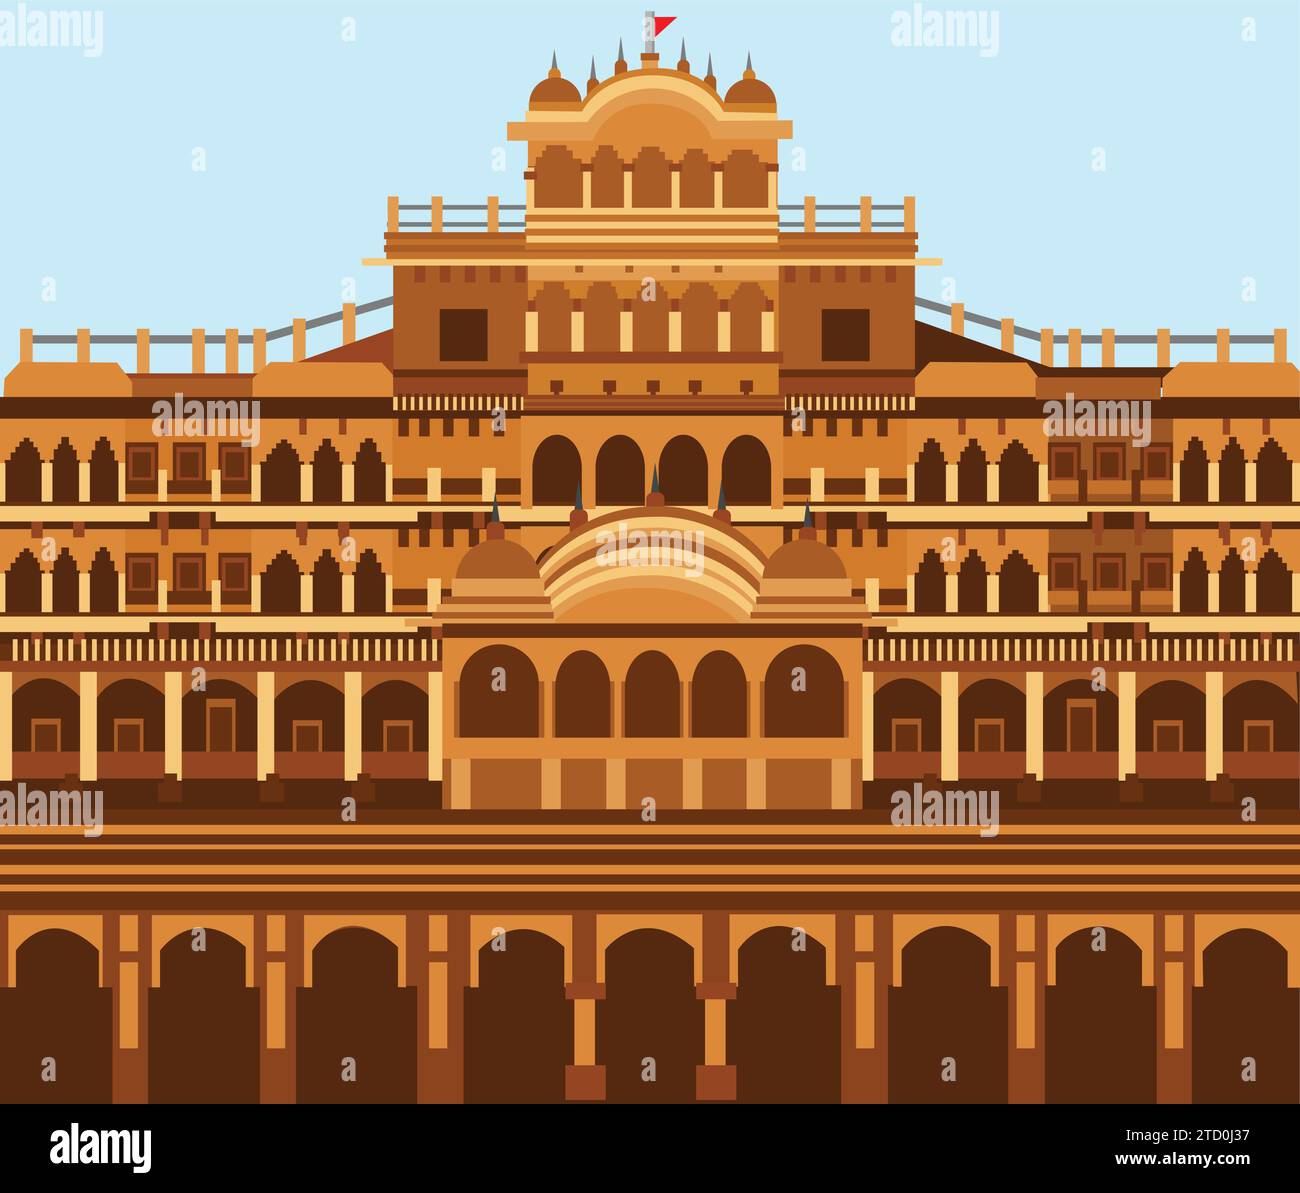 Vector illustration of famous landmark City Palace, Jaipur, India. Business Travel and Tourism Concept Stock Vector